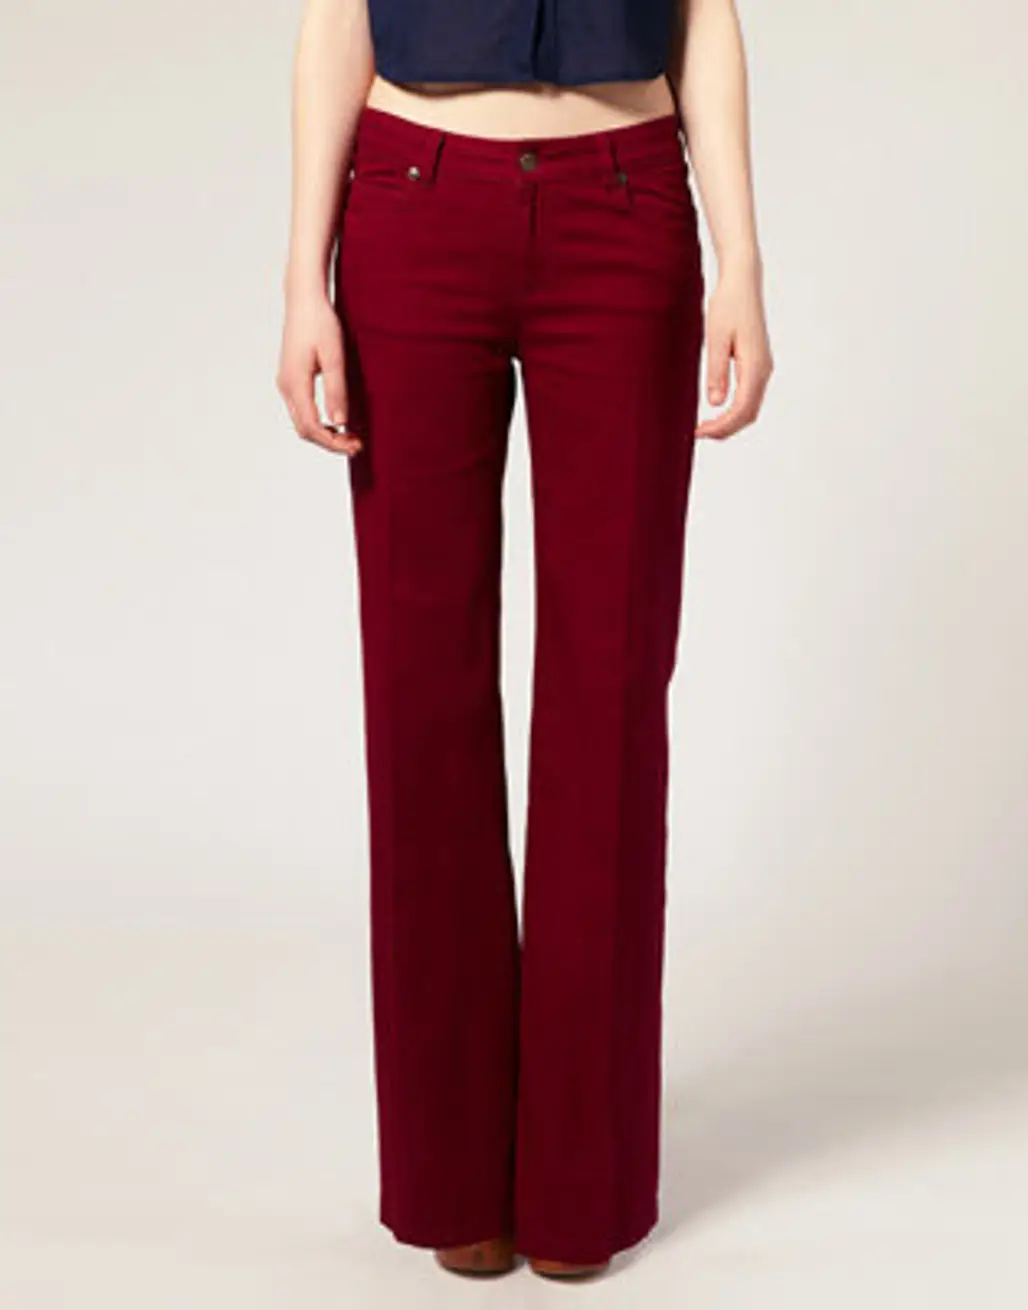 ASOS Berry Flared Jeans